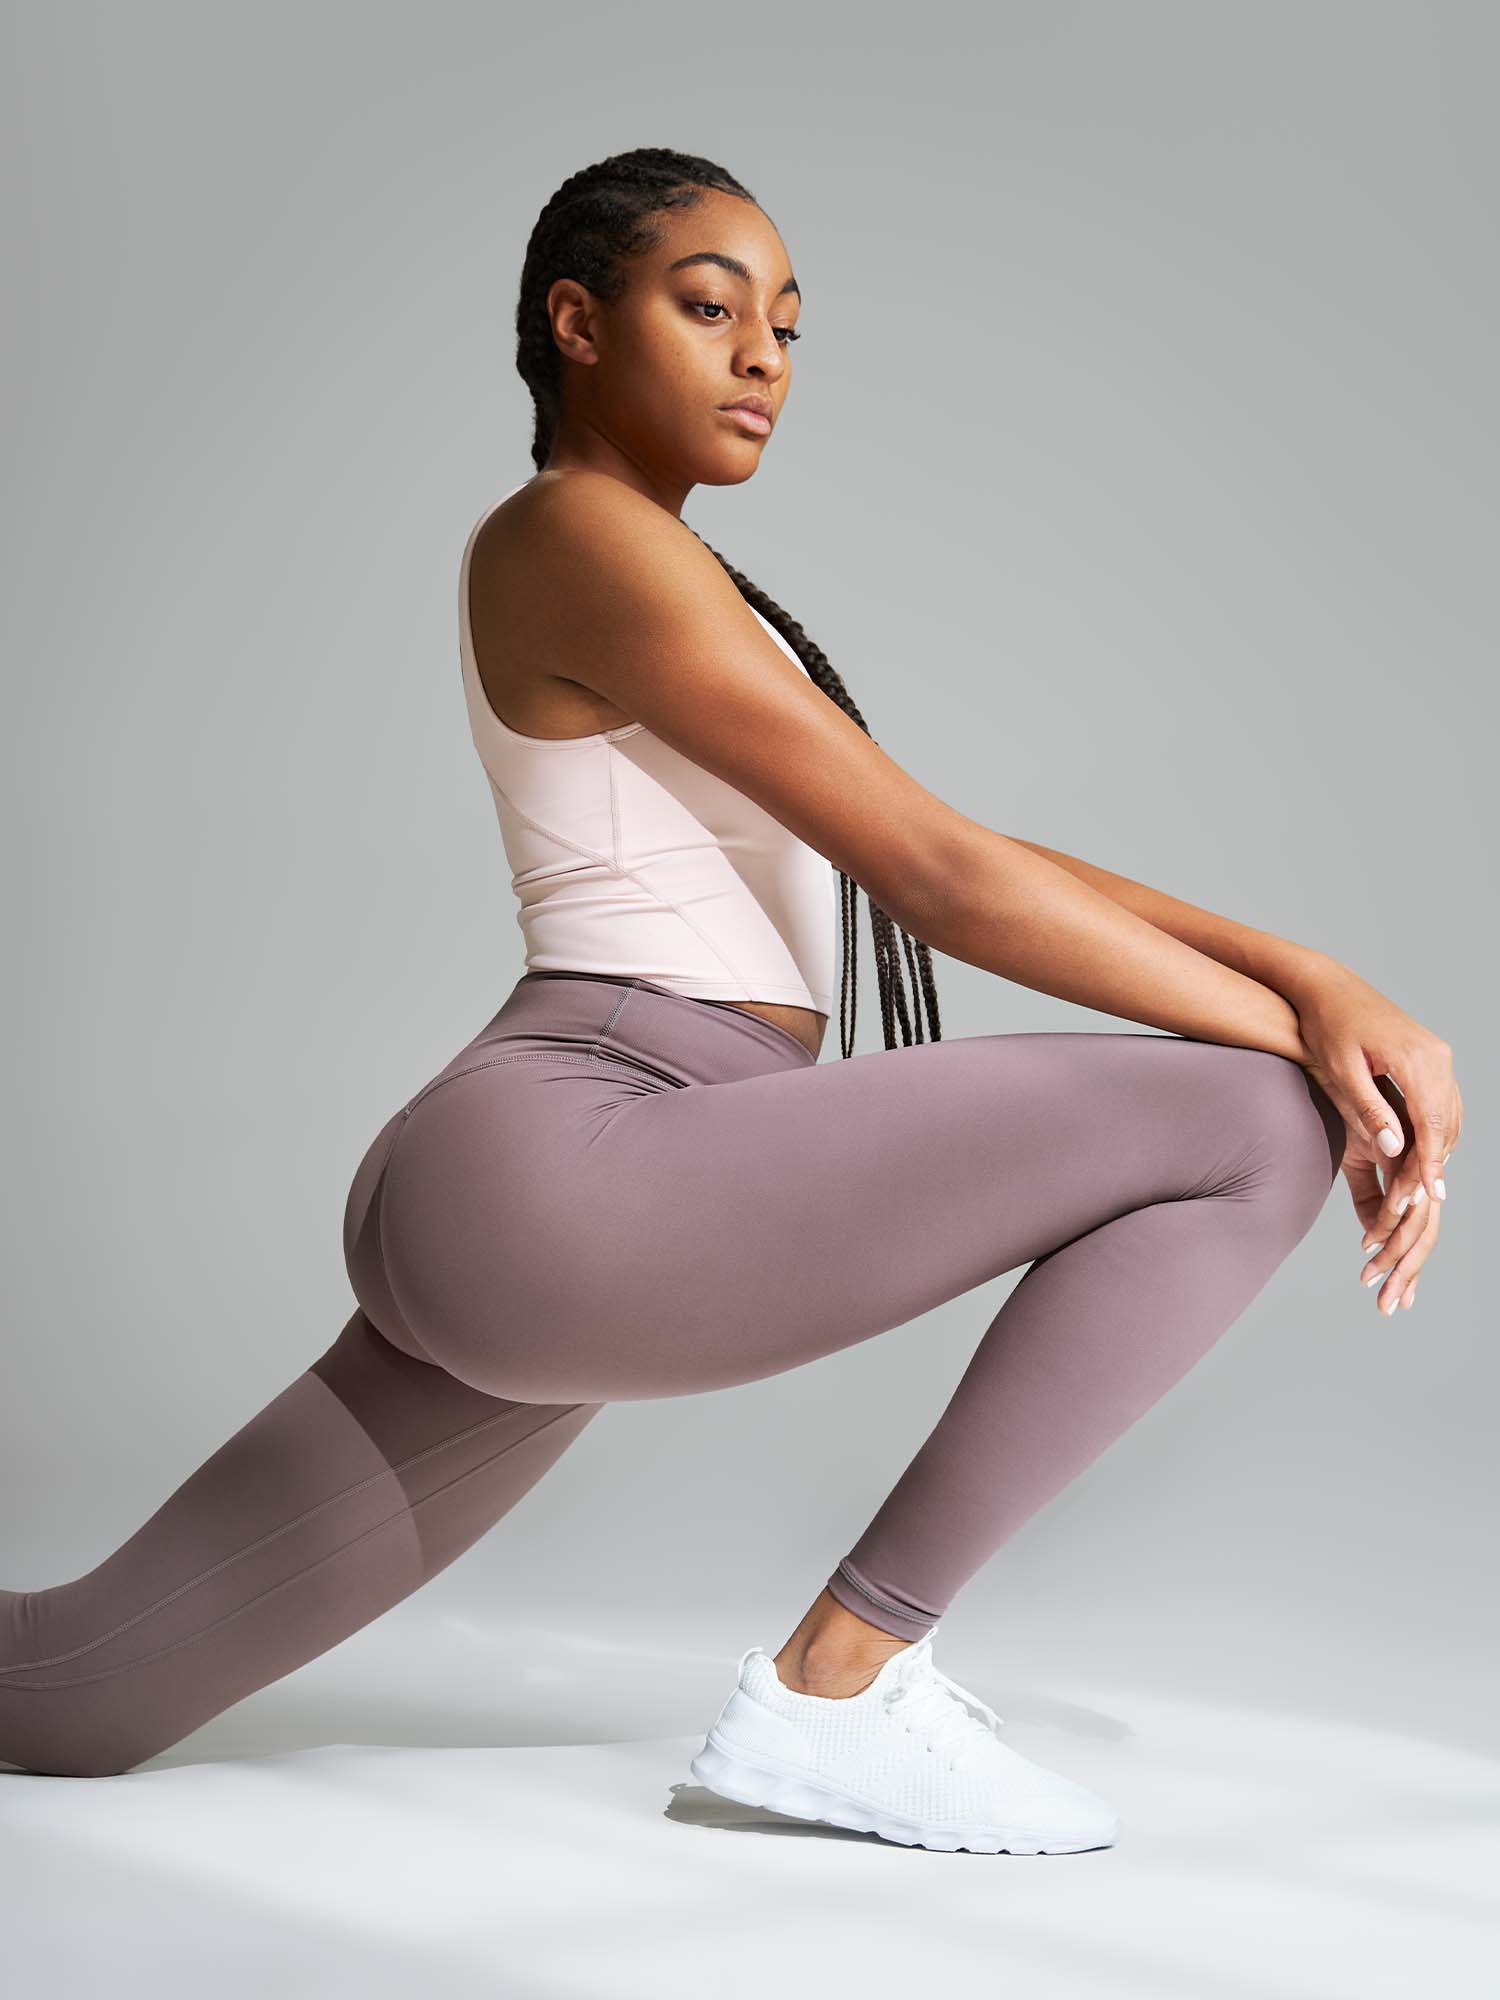 Tall woman wearing a light pink tank top and mauve leggings doing a lunge